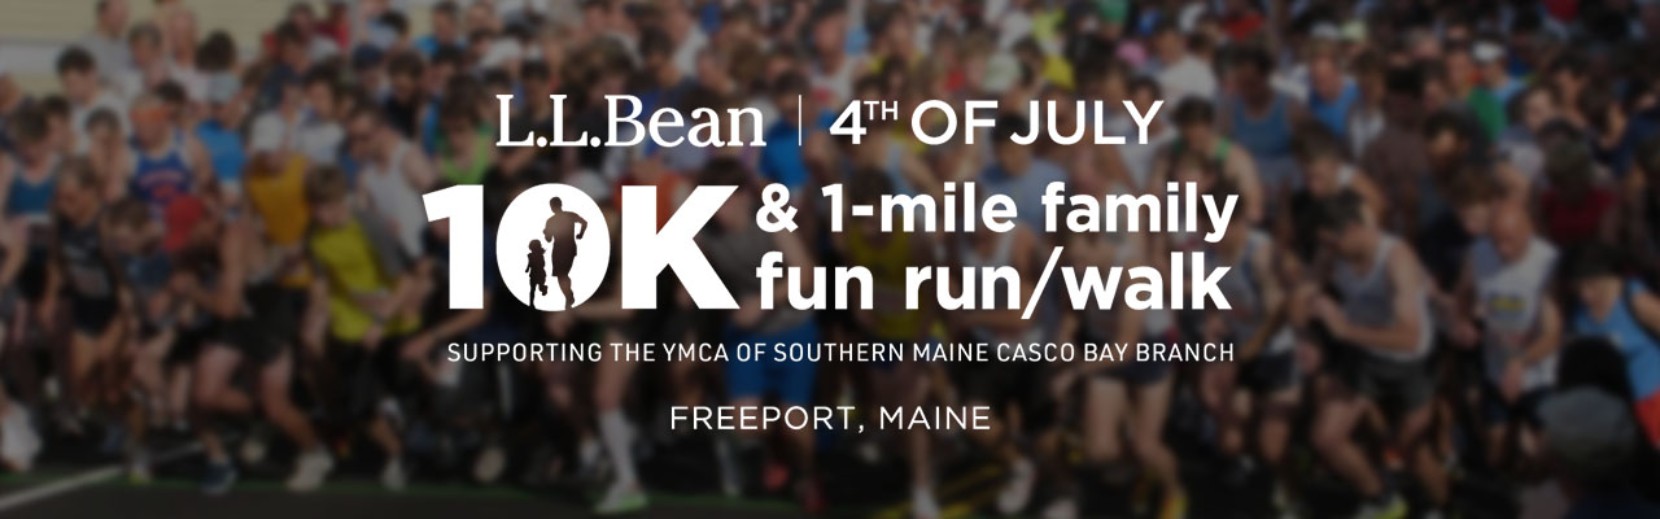 People running in the July 4th L.L.Bean road race